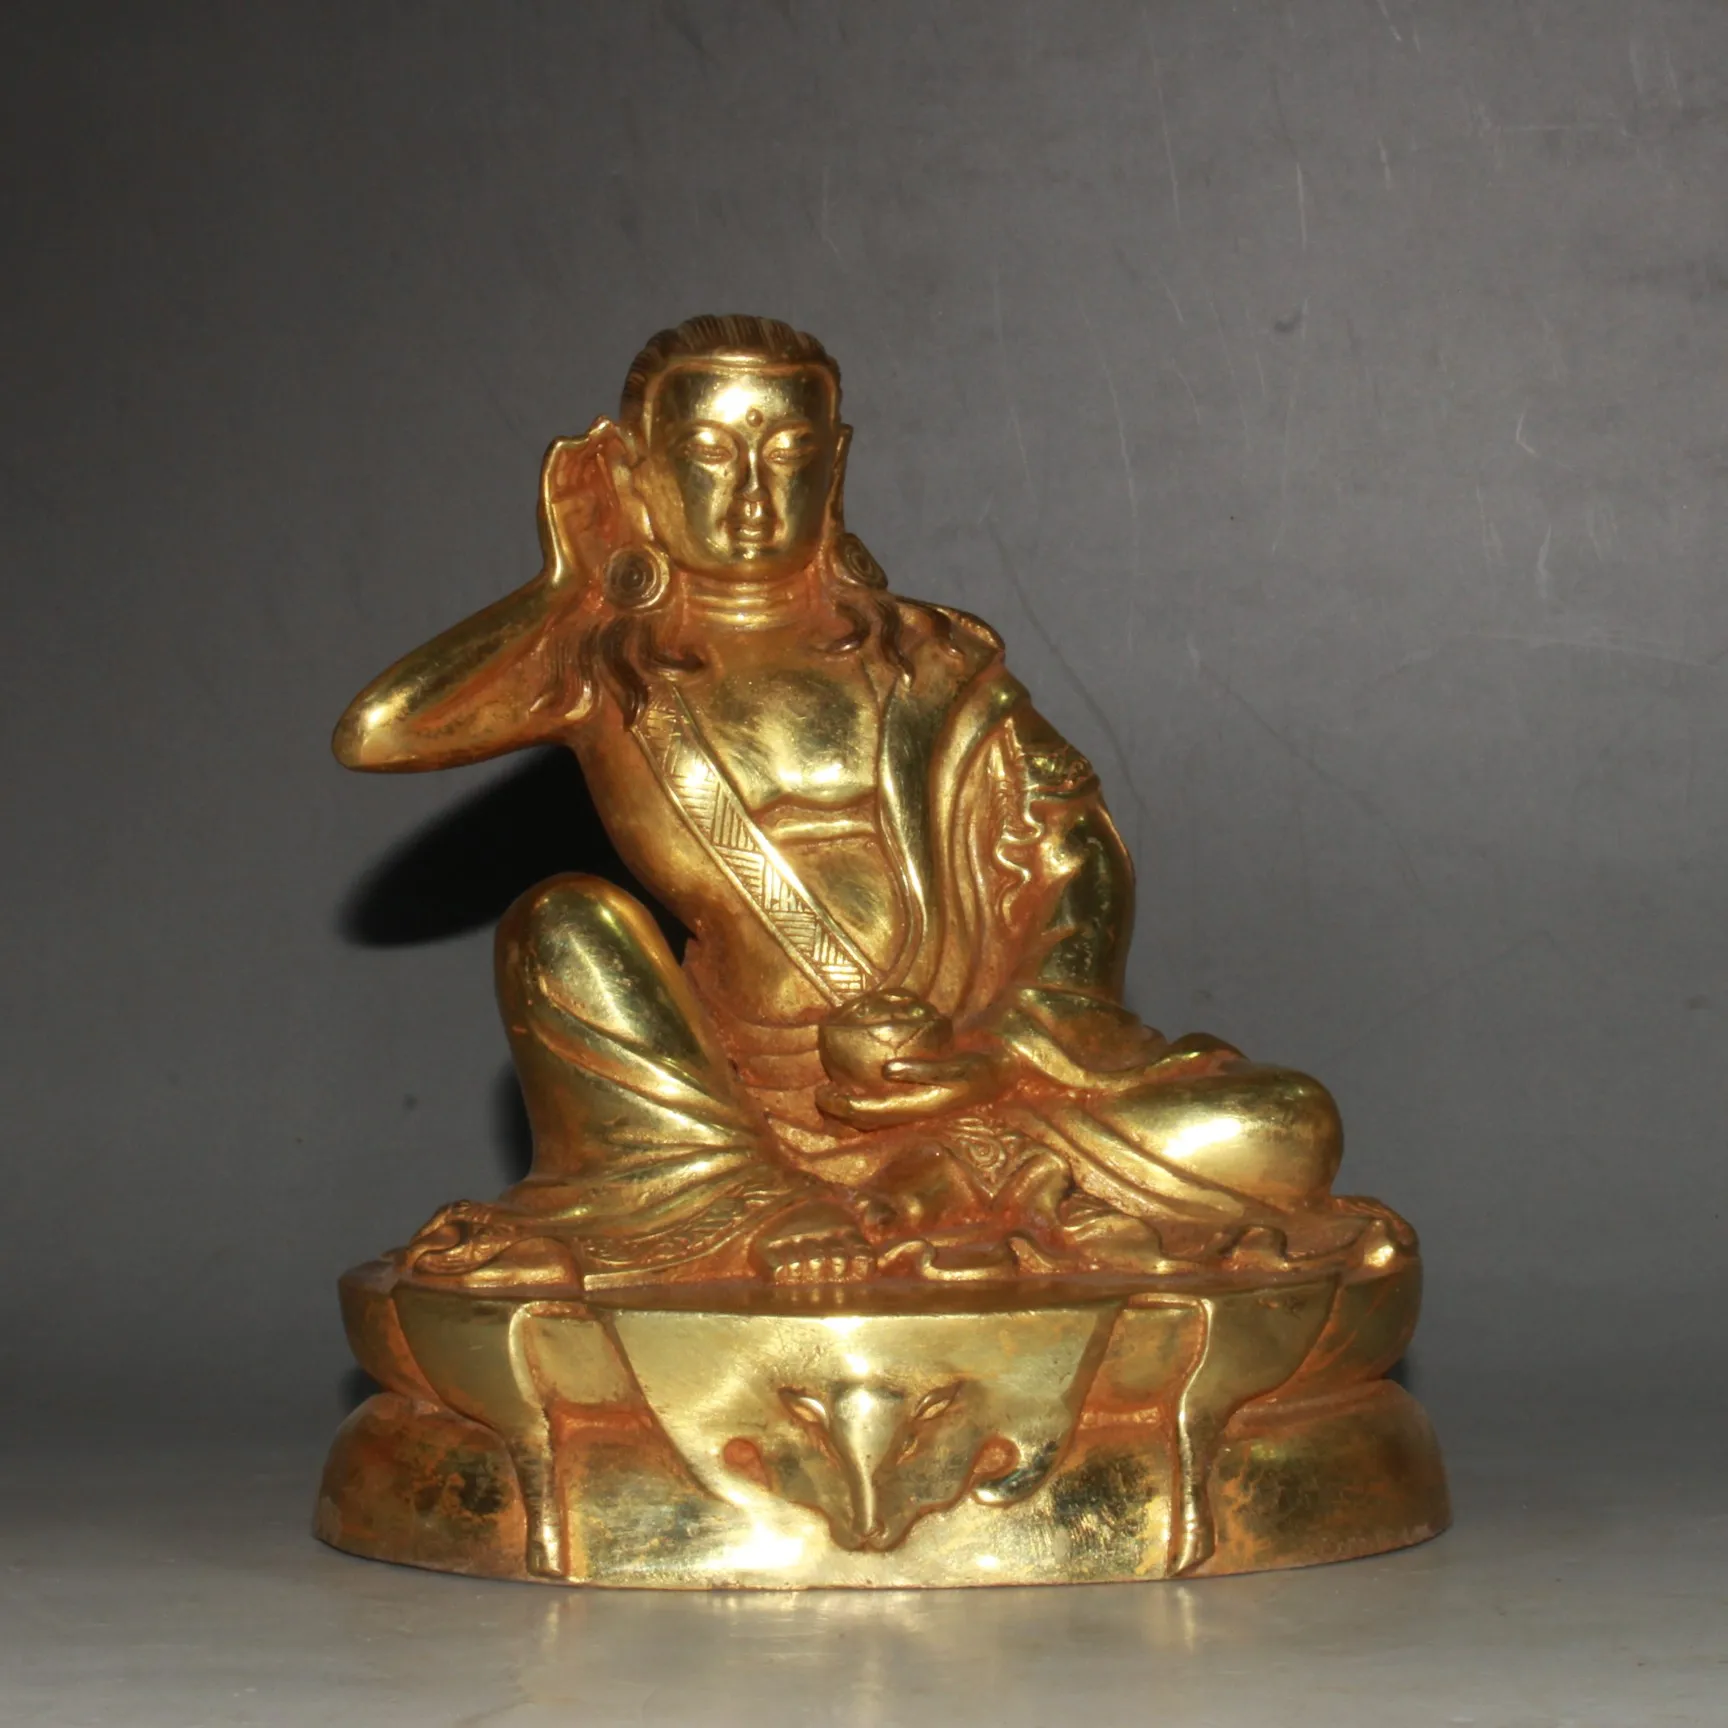 

Home Crafts Pure Copper Buddha Statues With Exquisite Workmanship and Beautiful Appearance are Worth Decorating and Collecting